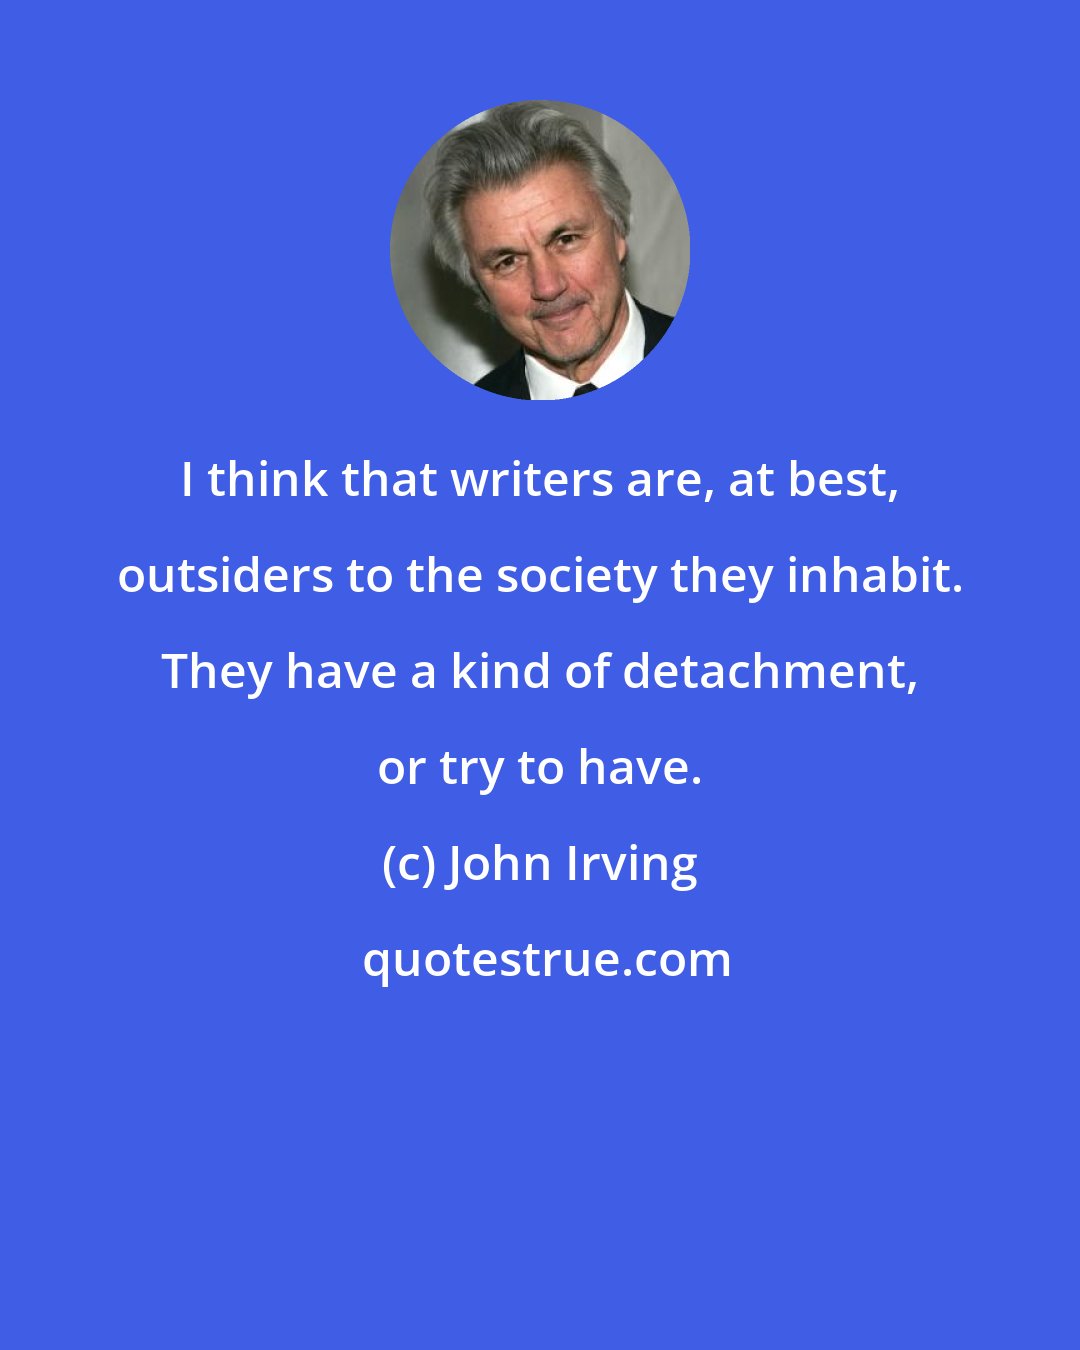 John Irving: I think that writers are, at best, outsiders to the society they inhabit. They have a kind of detachment, or try to have.